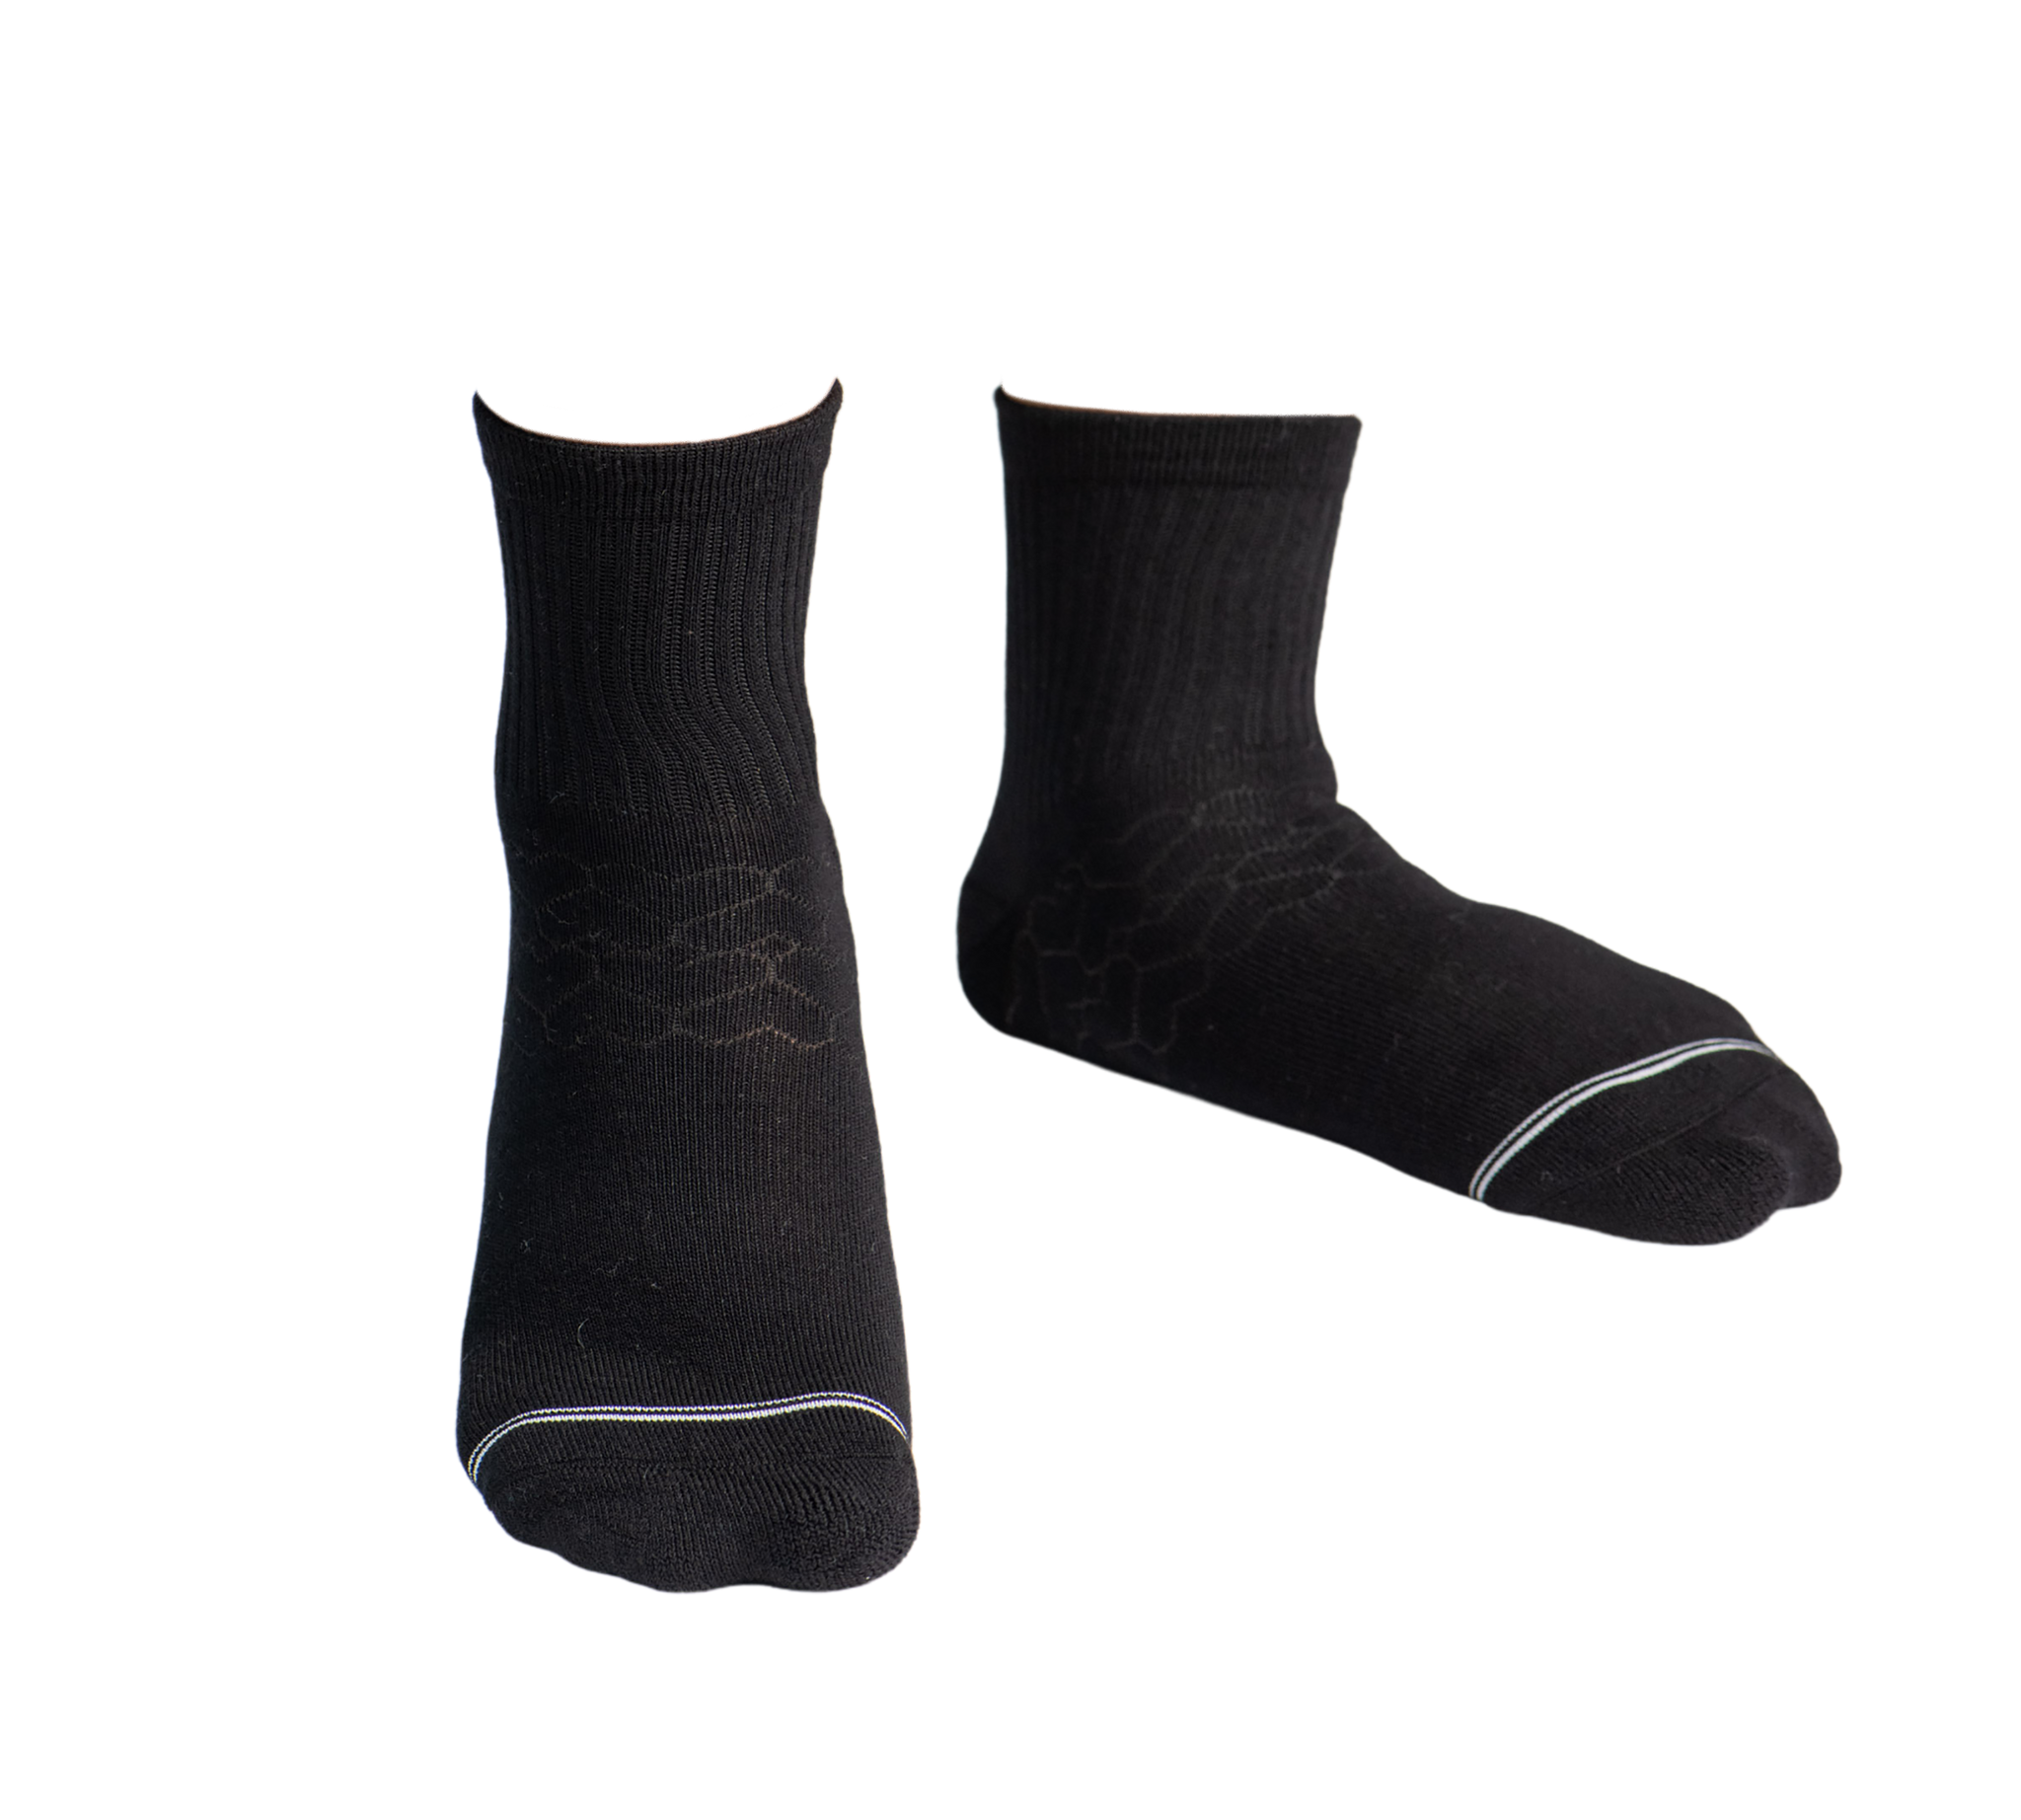 Pudus Bamboo Everyday Quarter Crew Socks | Moisture Wicking | Breathable | Extra Soft | Odor Resistant | All Day Comfort